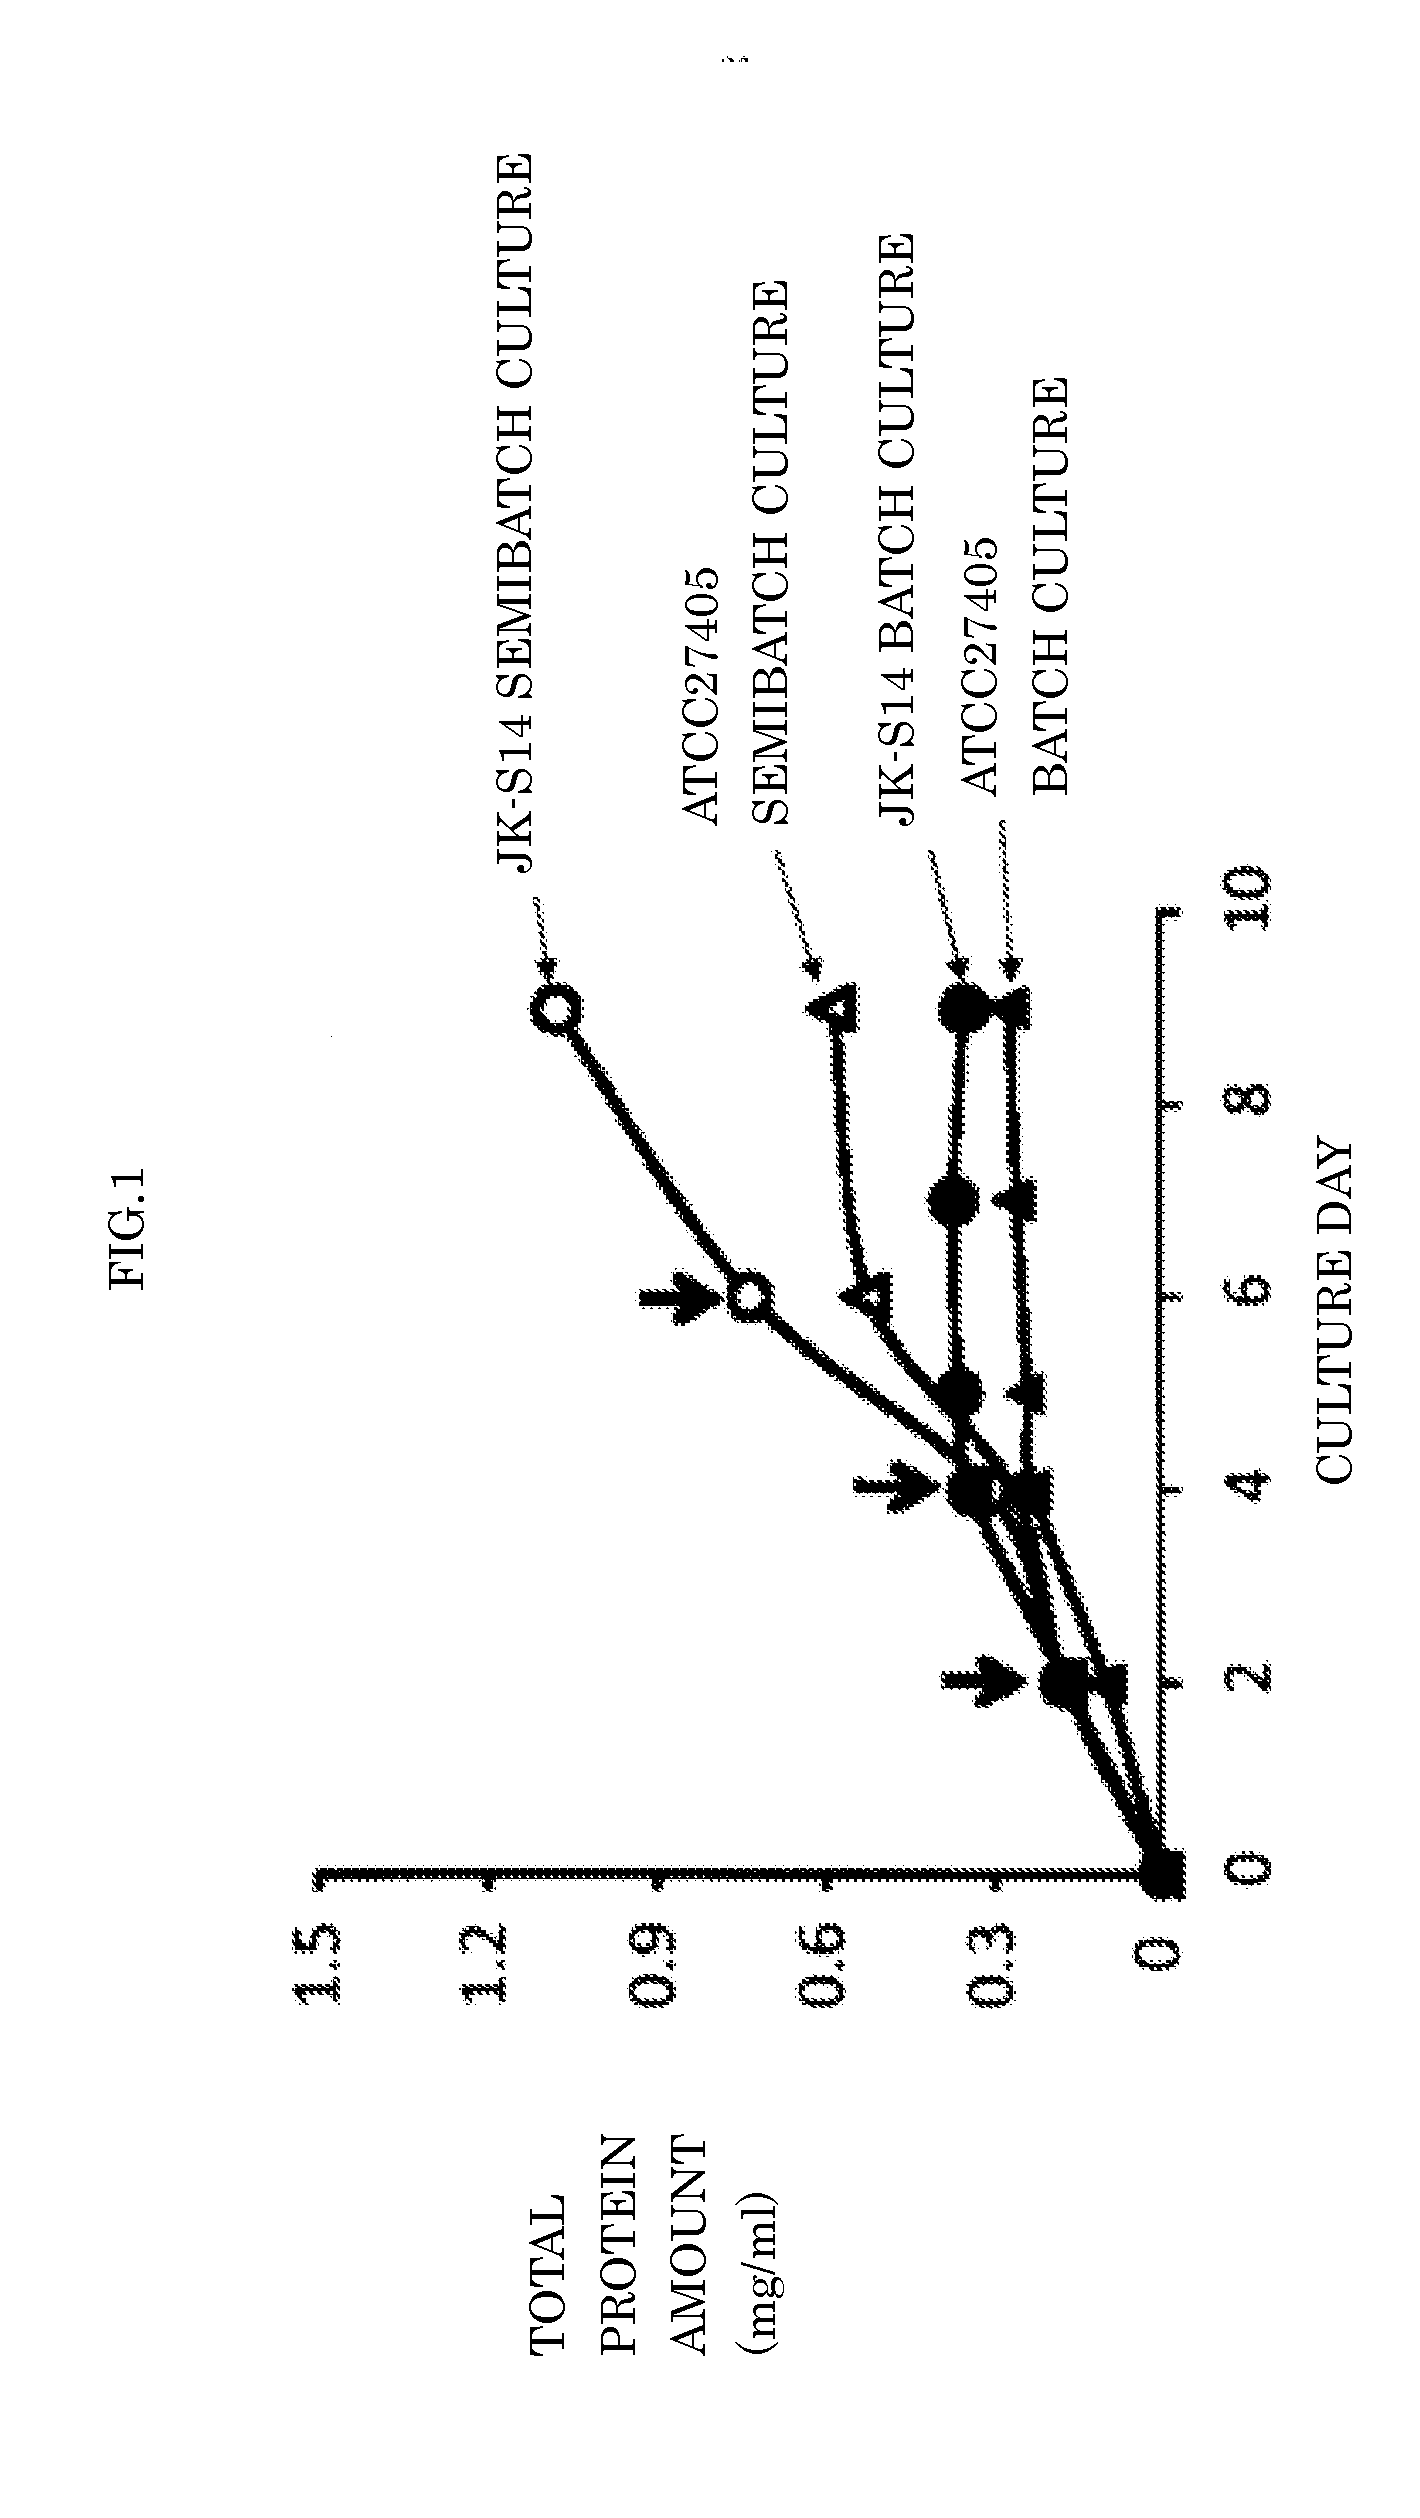 Method for producing cellulolytic enzyme using clostridium microorganism and method for culturing and proliferating clostridium microorganism